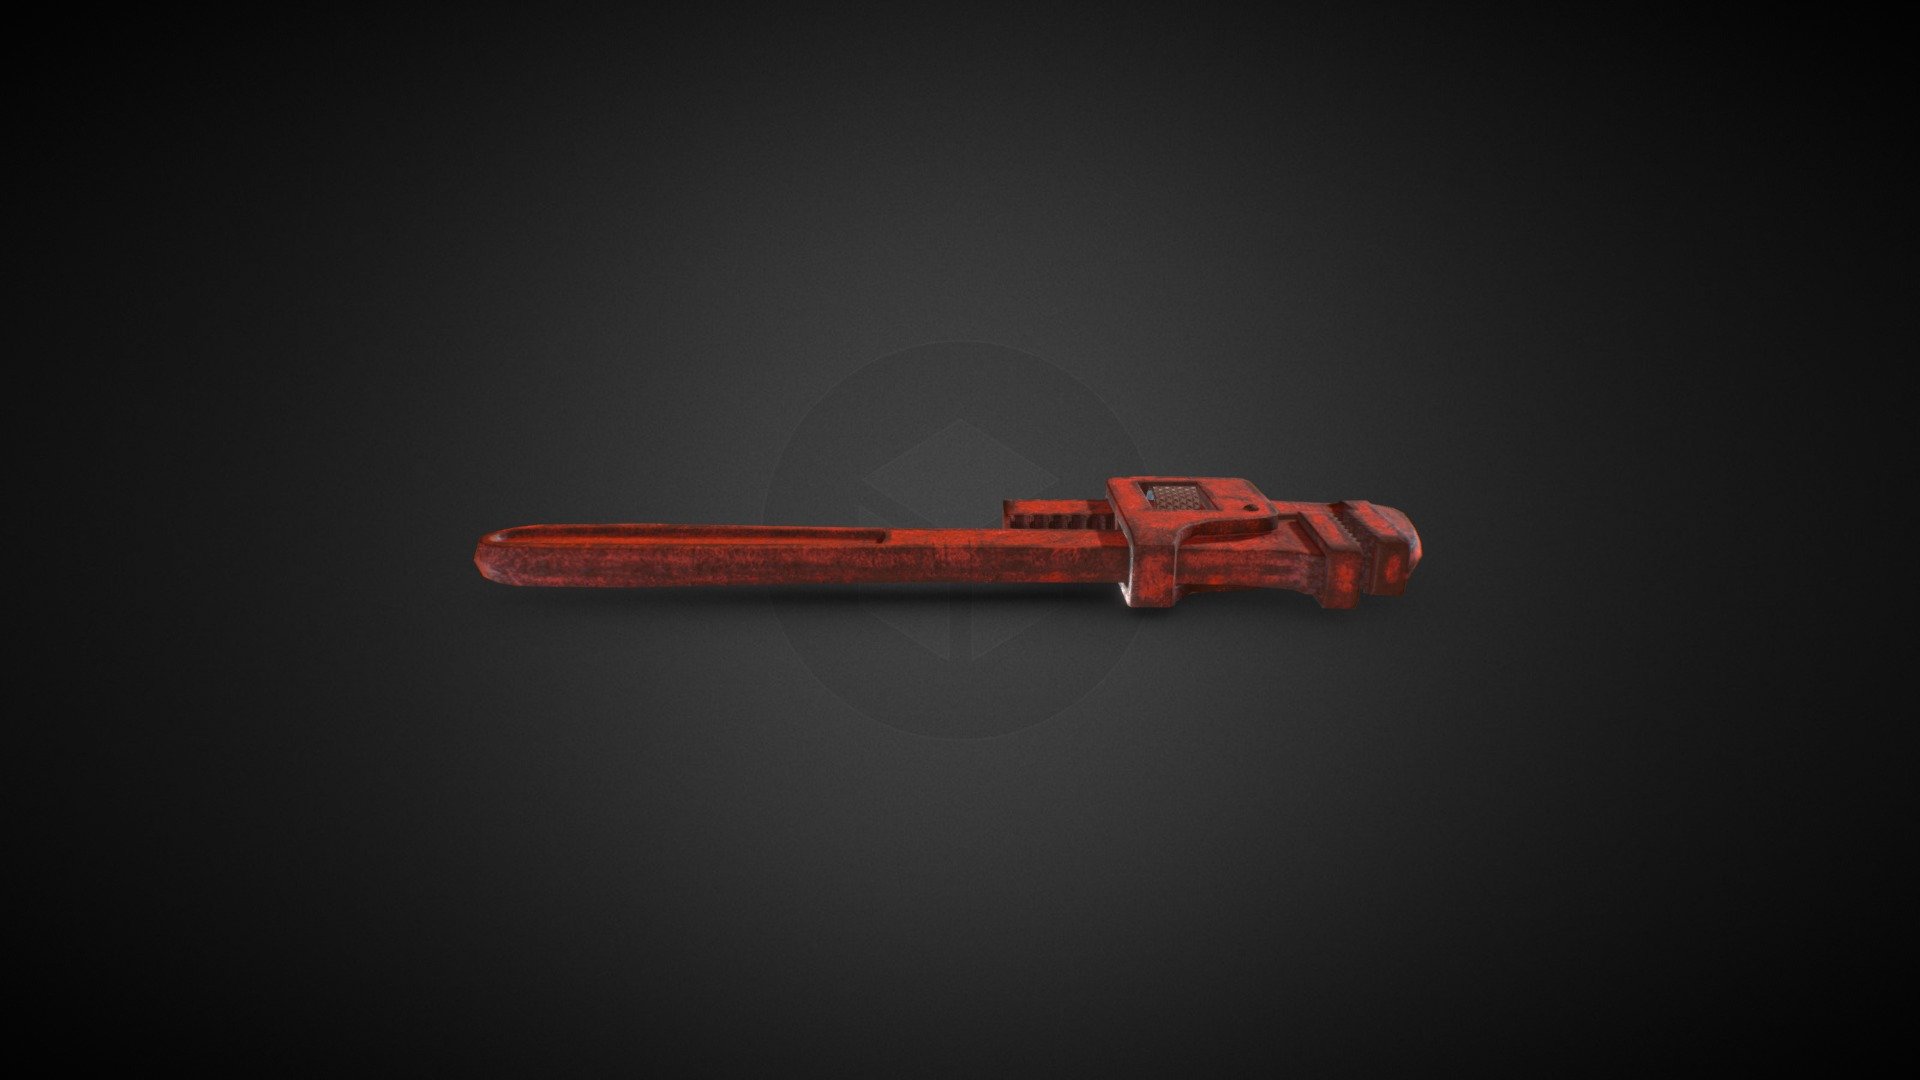 Low poly Wrench model made in Maya and Baked,Textured in Substance Painter 3d model